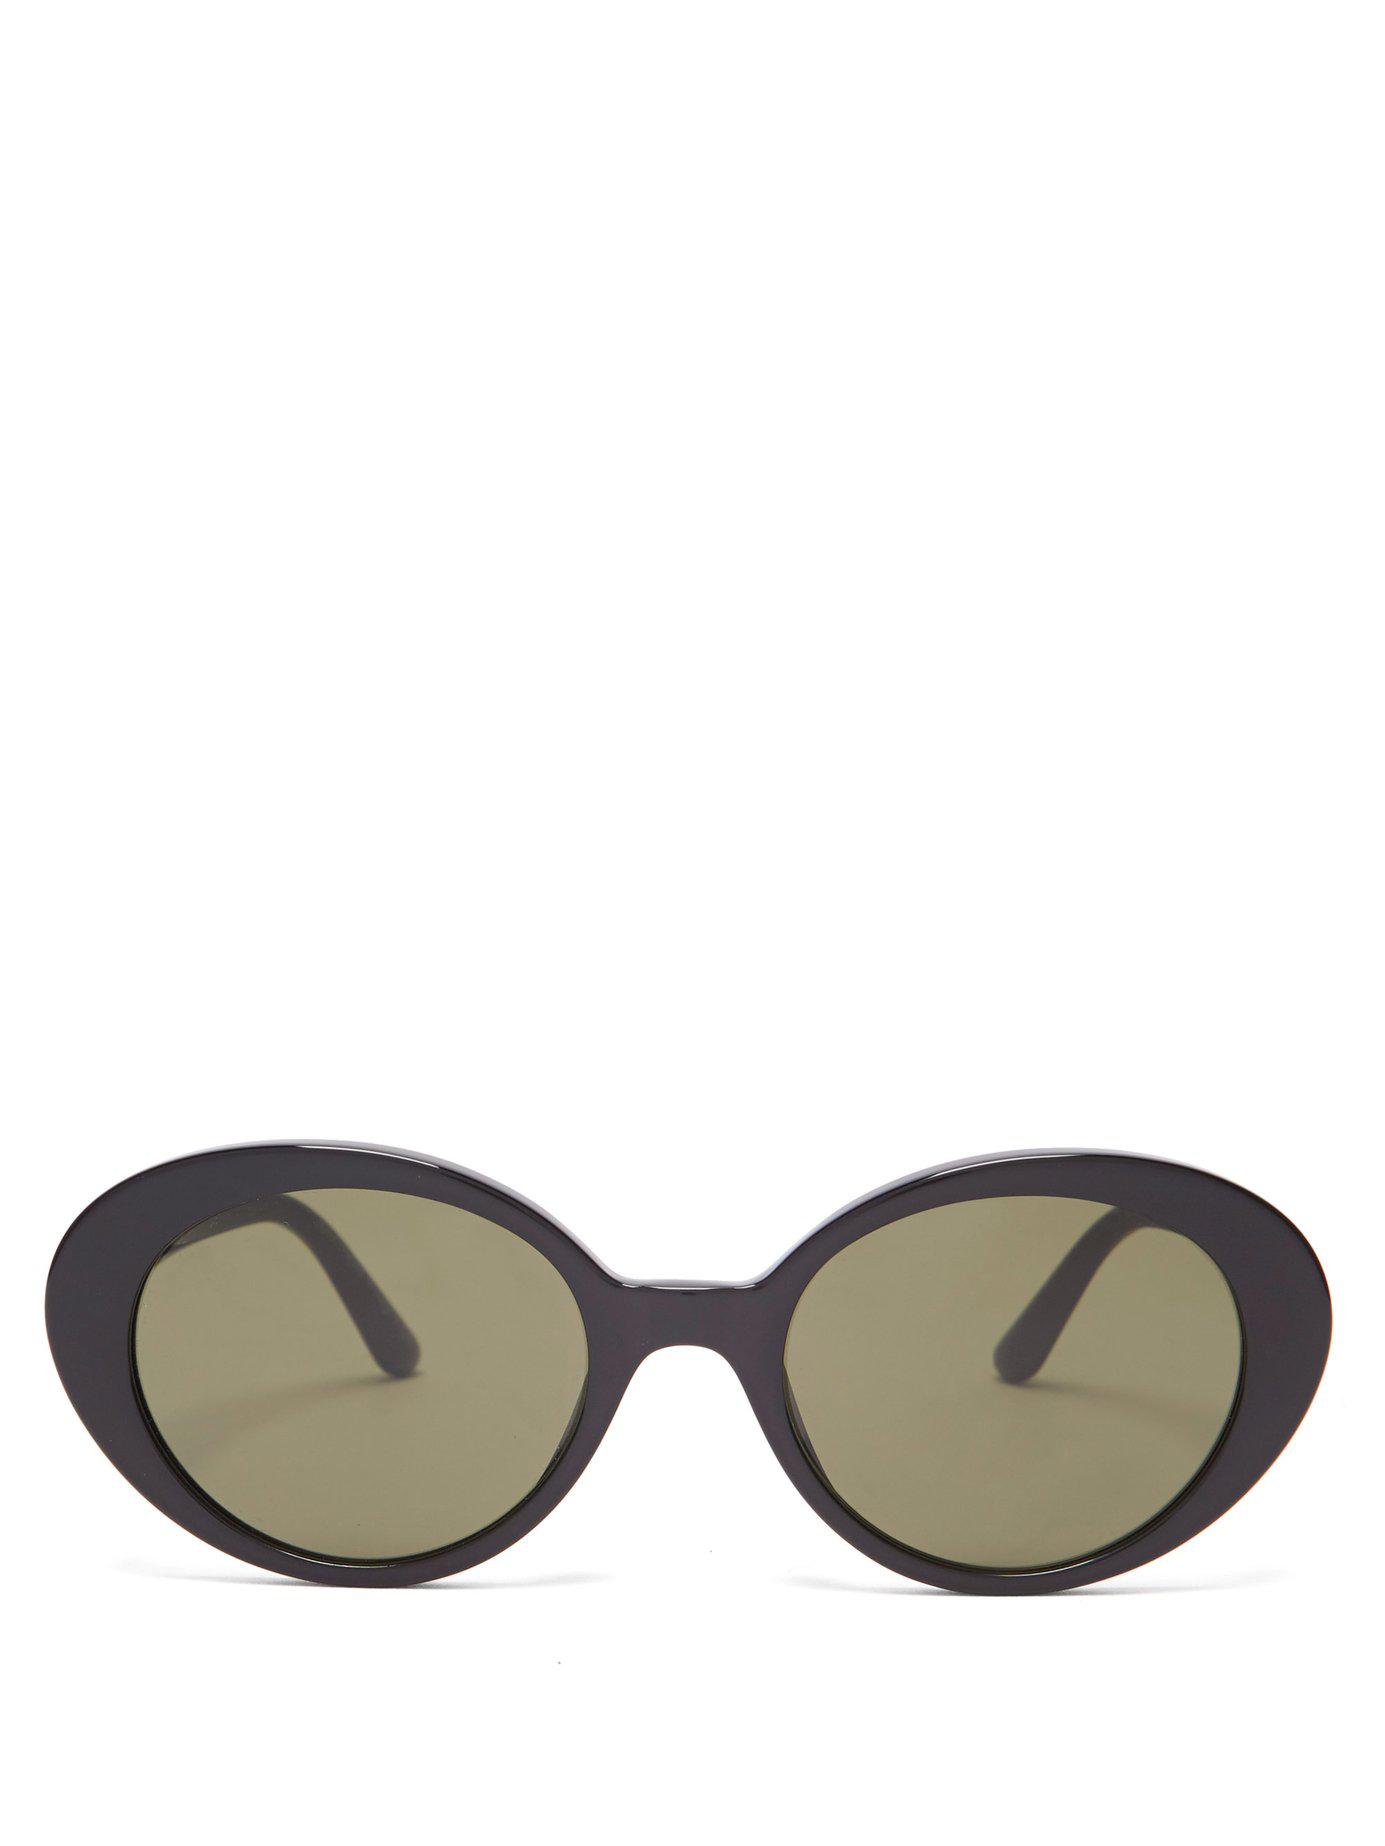 The Row X Oliver Peoples Parquet Sunglasses in Black | Lyst